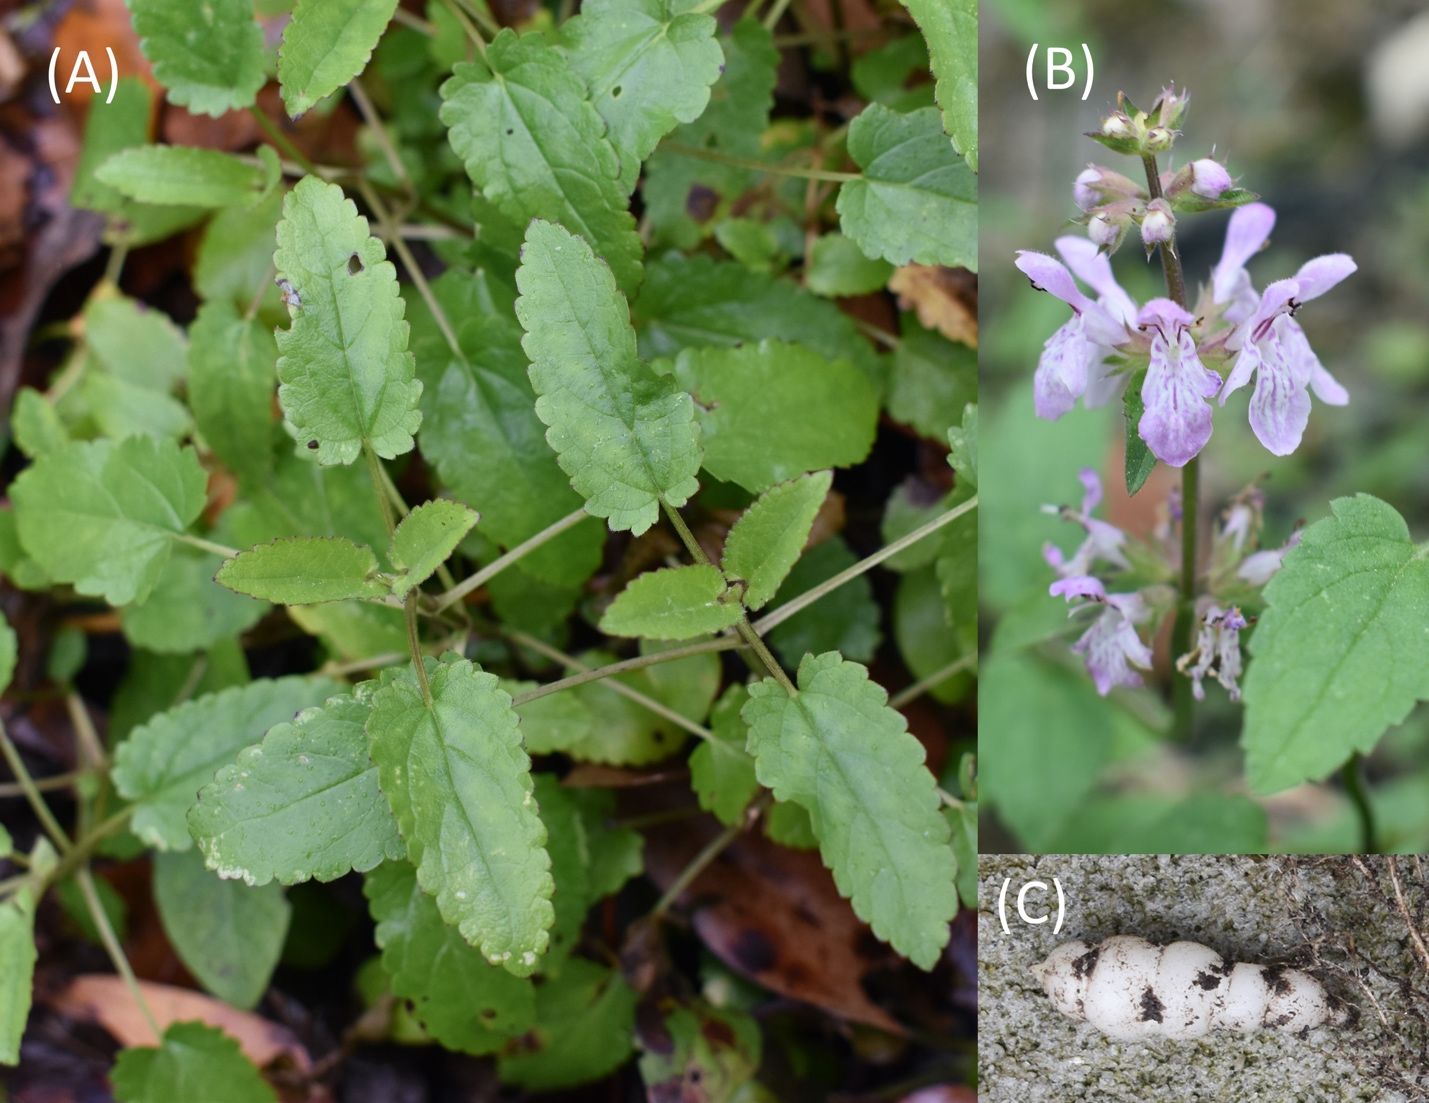 Stachys floridana in Gainesville, Florida. (A) leaves, (B) flowers, and (C) tuber.